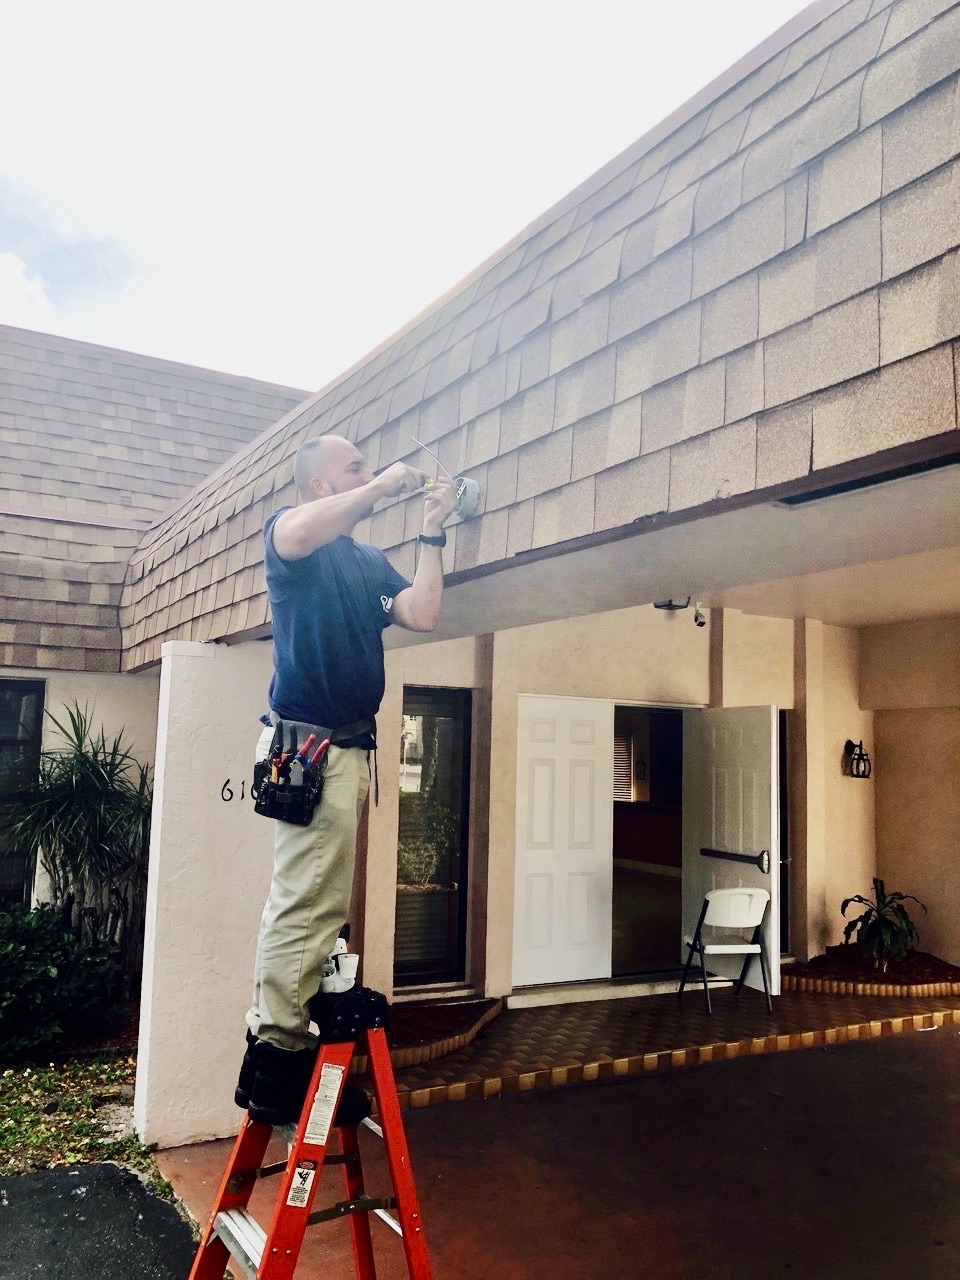 If you are searching for the best Residential Electrician Near Me in South Florida you are in luck! Look no further than VP Electric!